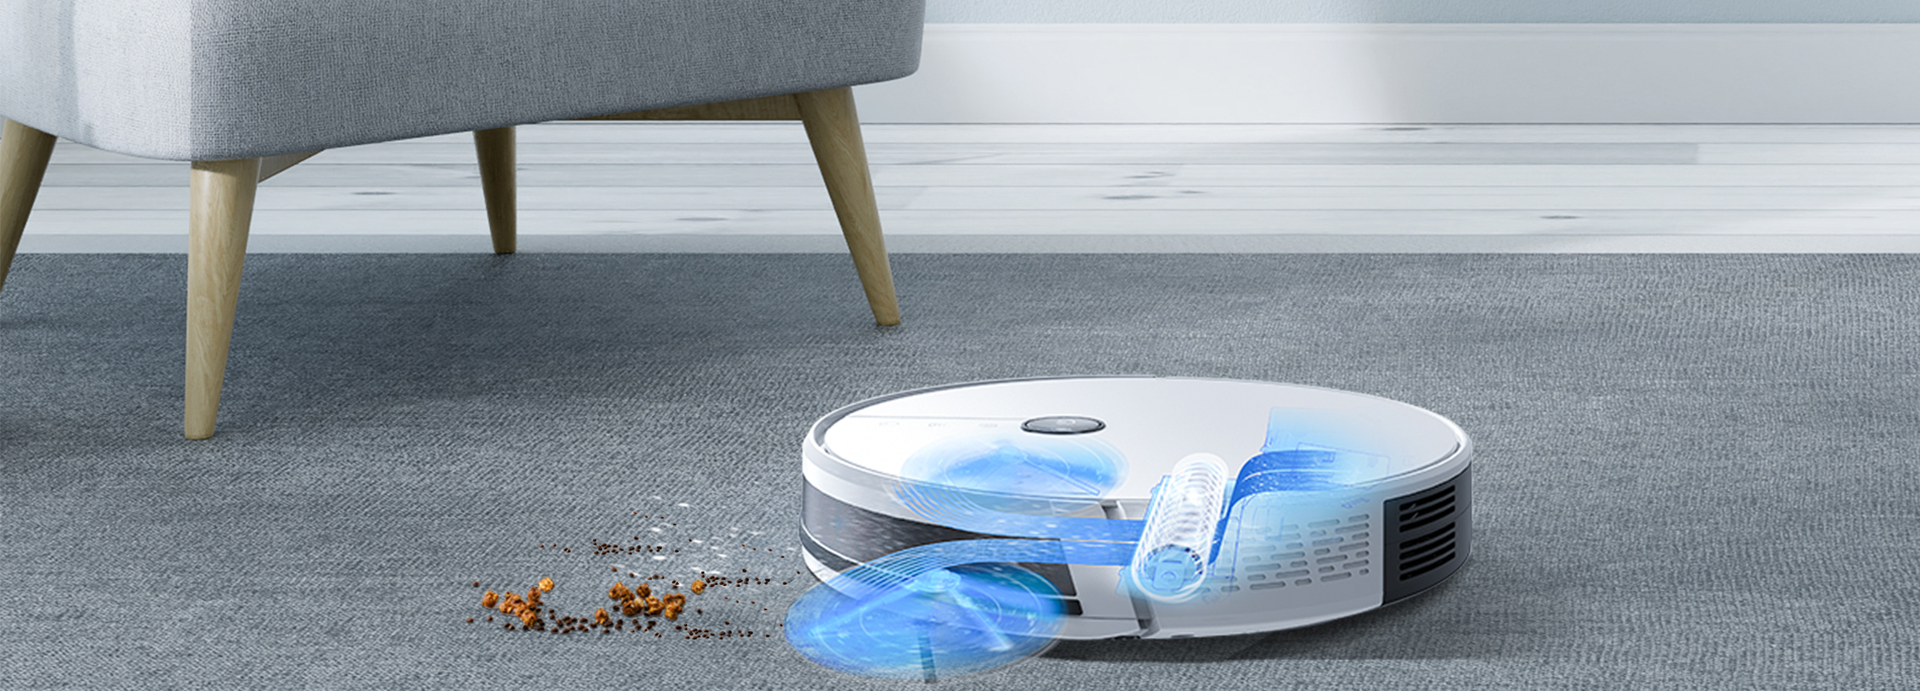 High Power 2 in 1 Vacuum and Mop Robot